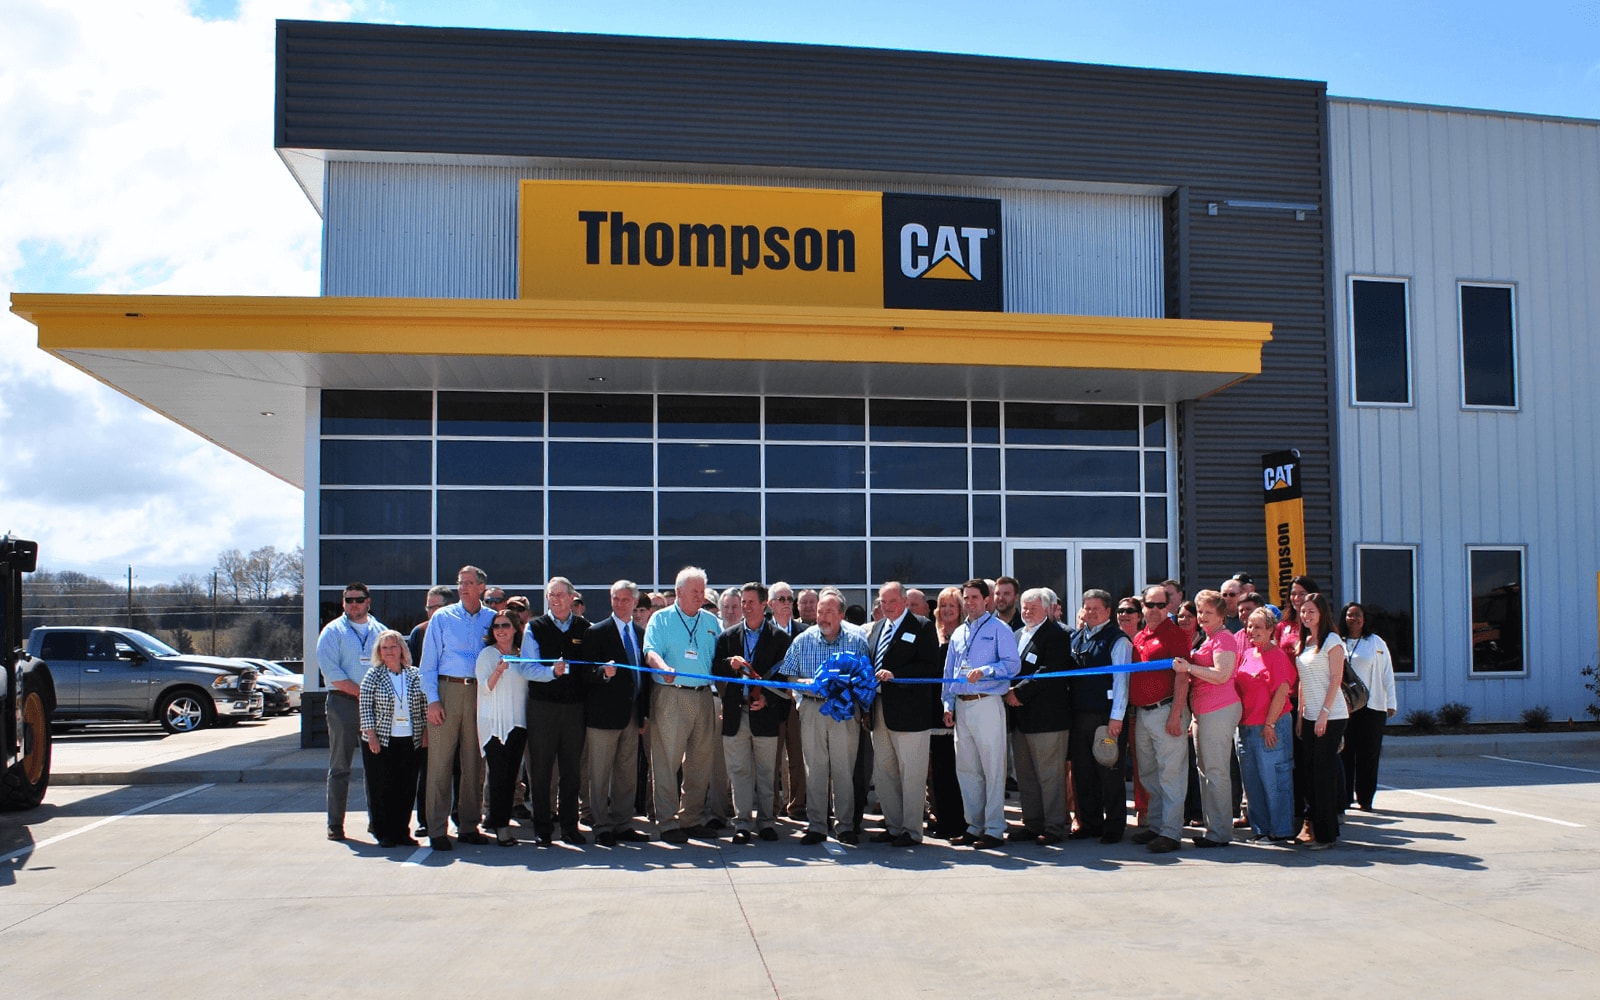 Thompson Cat developed by Century Construction.